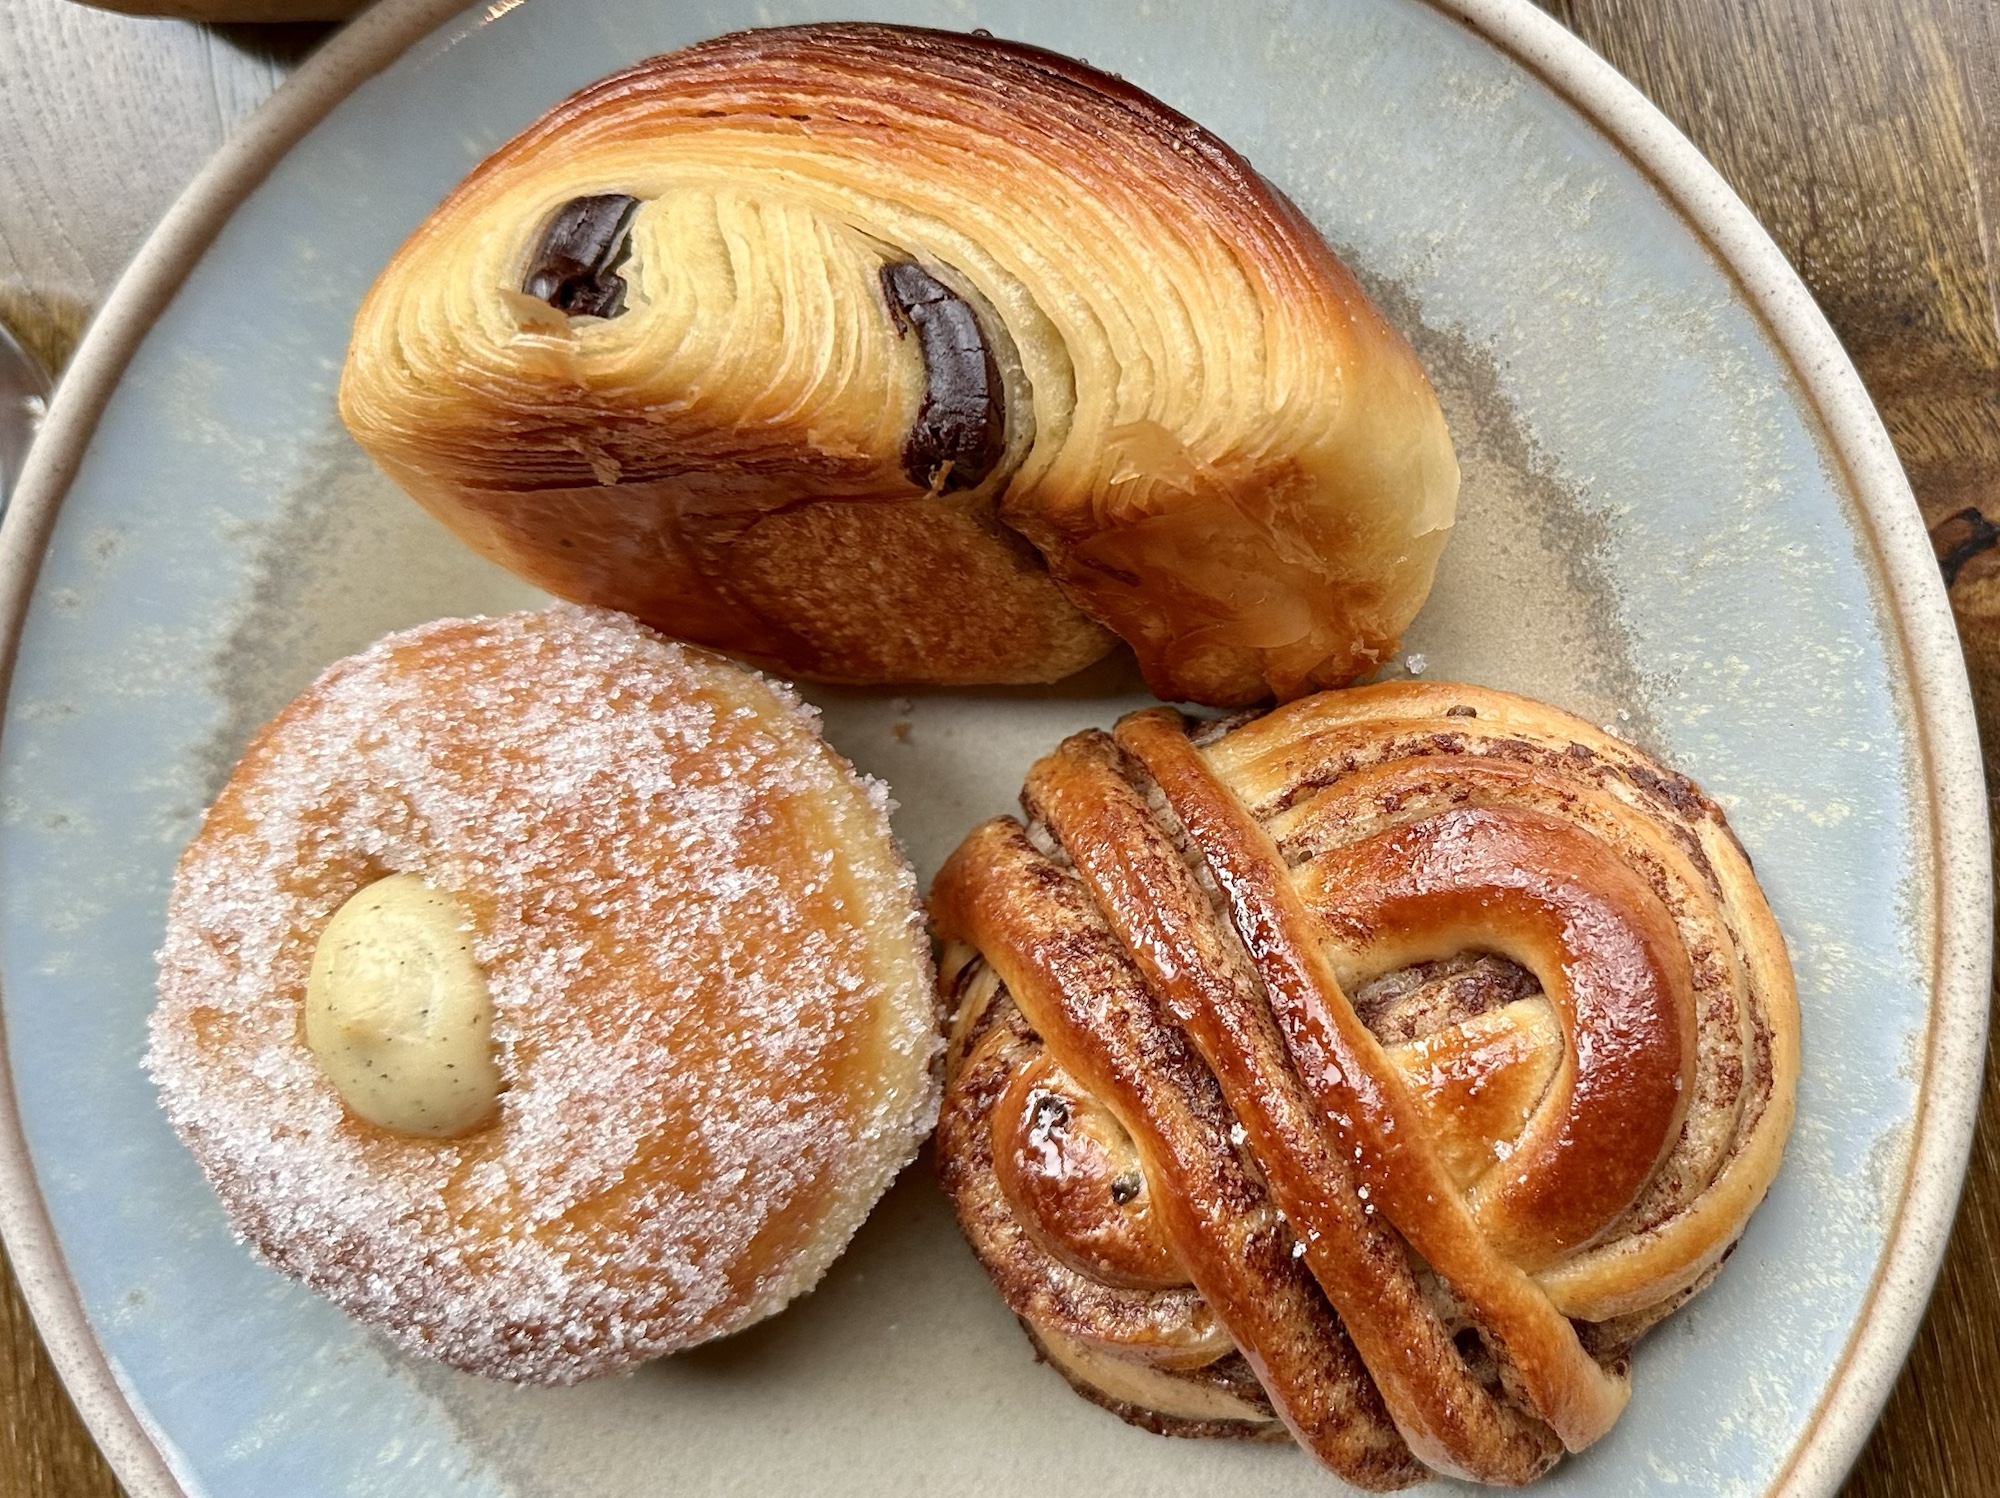 a plate of pastries